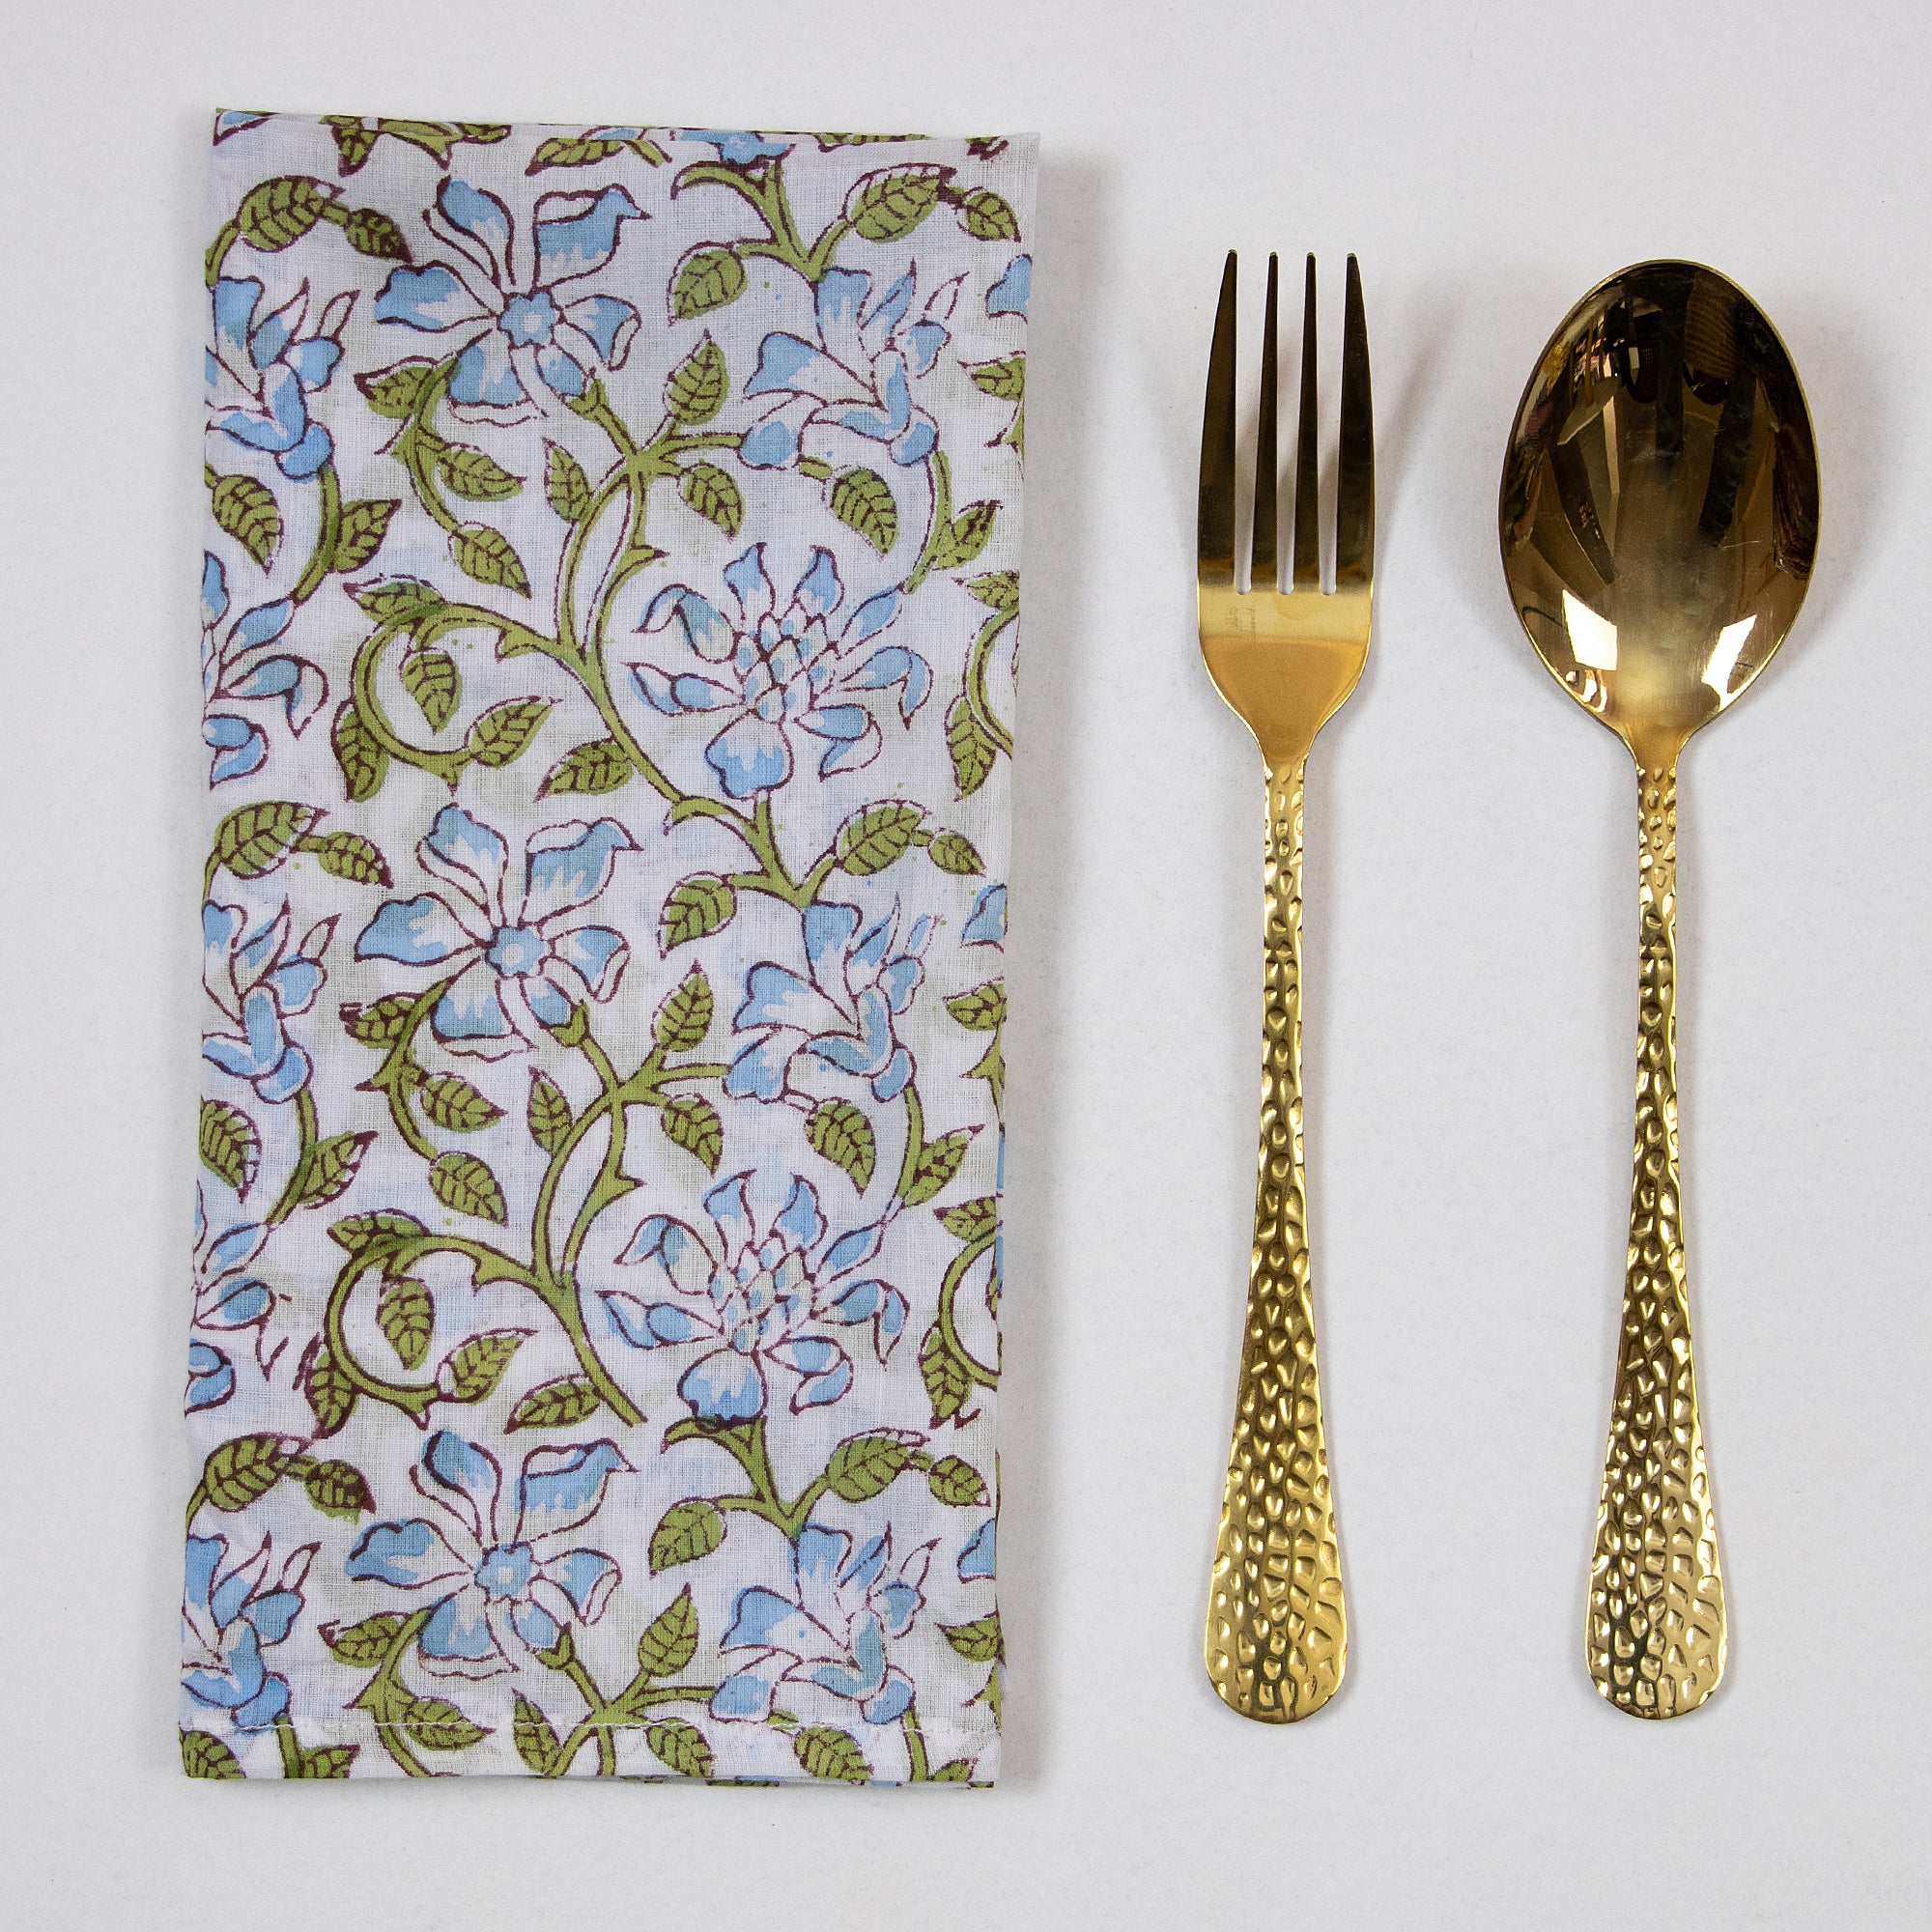 Flower Printed Soft Cotton Dining Table Napkins